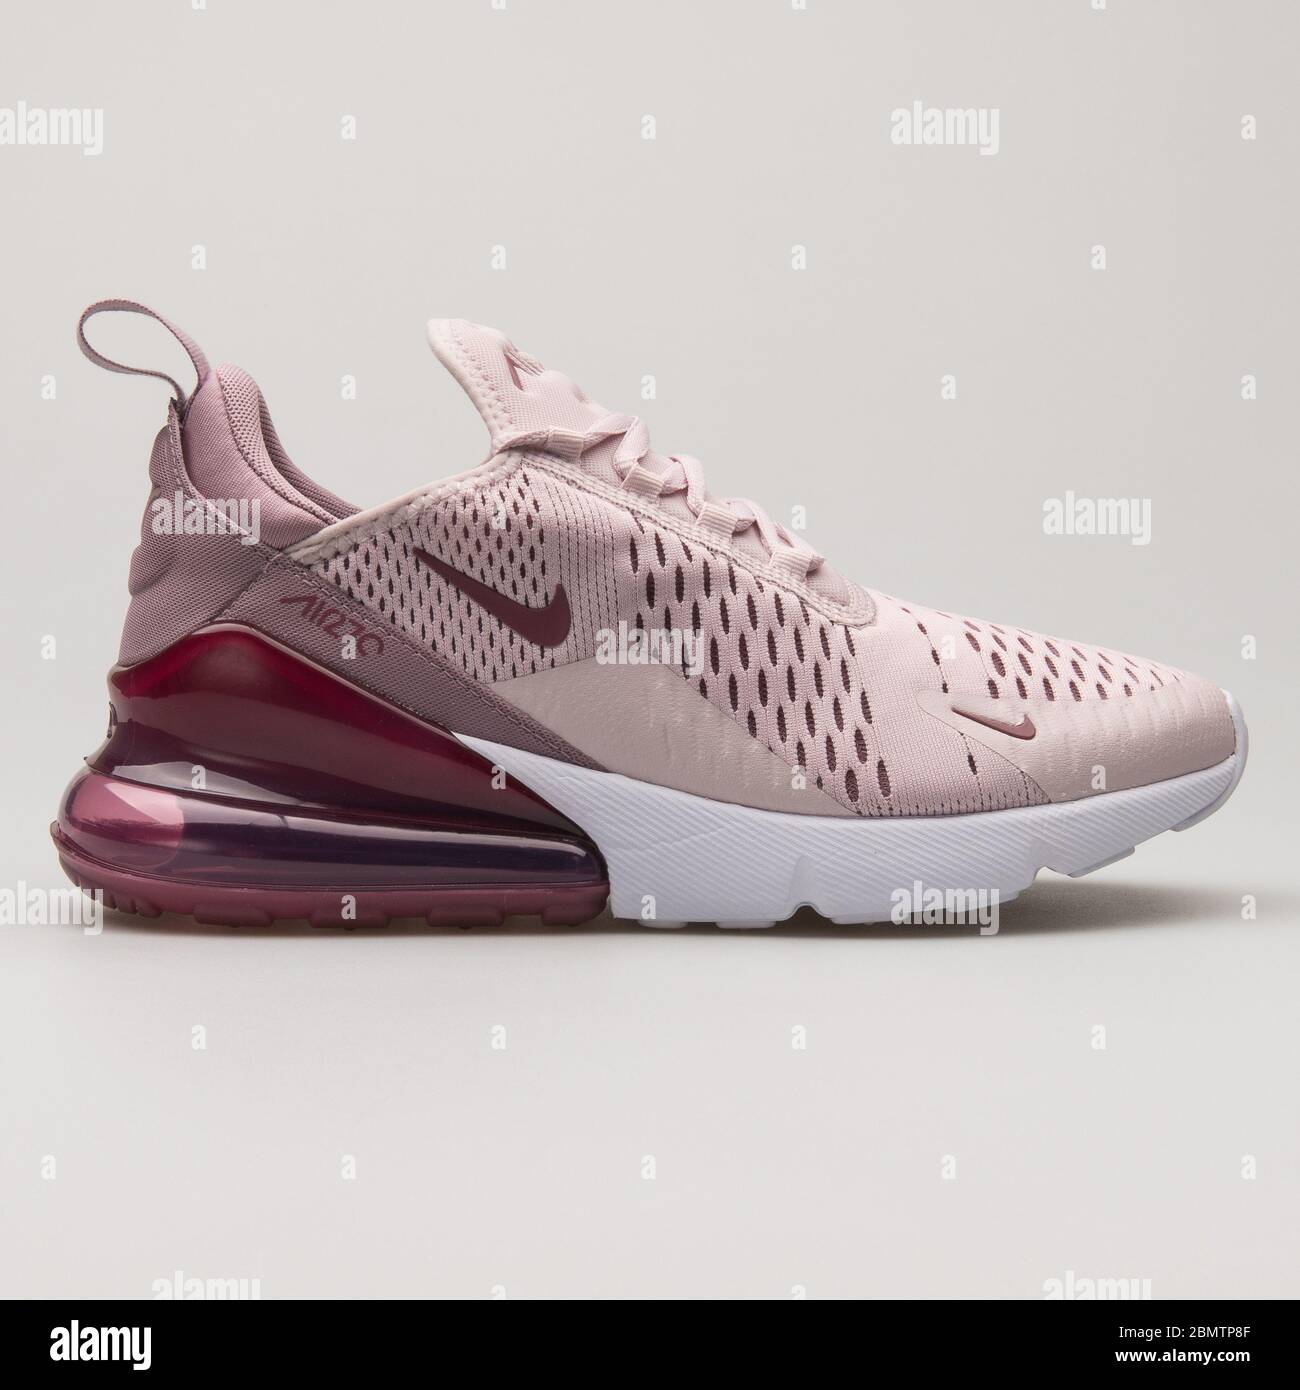 VIENNA, AUSTRIA - FEBRUARY 19, 2018: Nike Air Max 270 rose and burgundy  sneaker on white background Stock Photo - Alamy